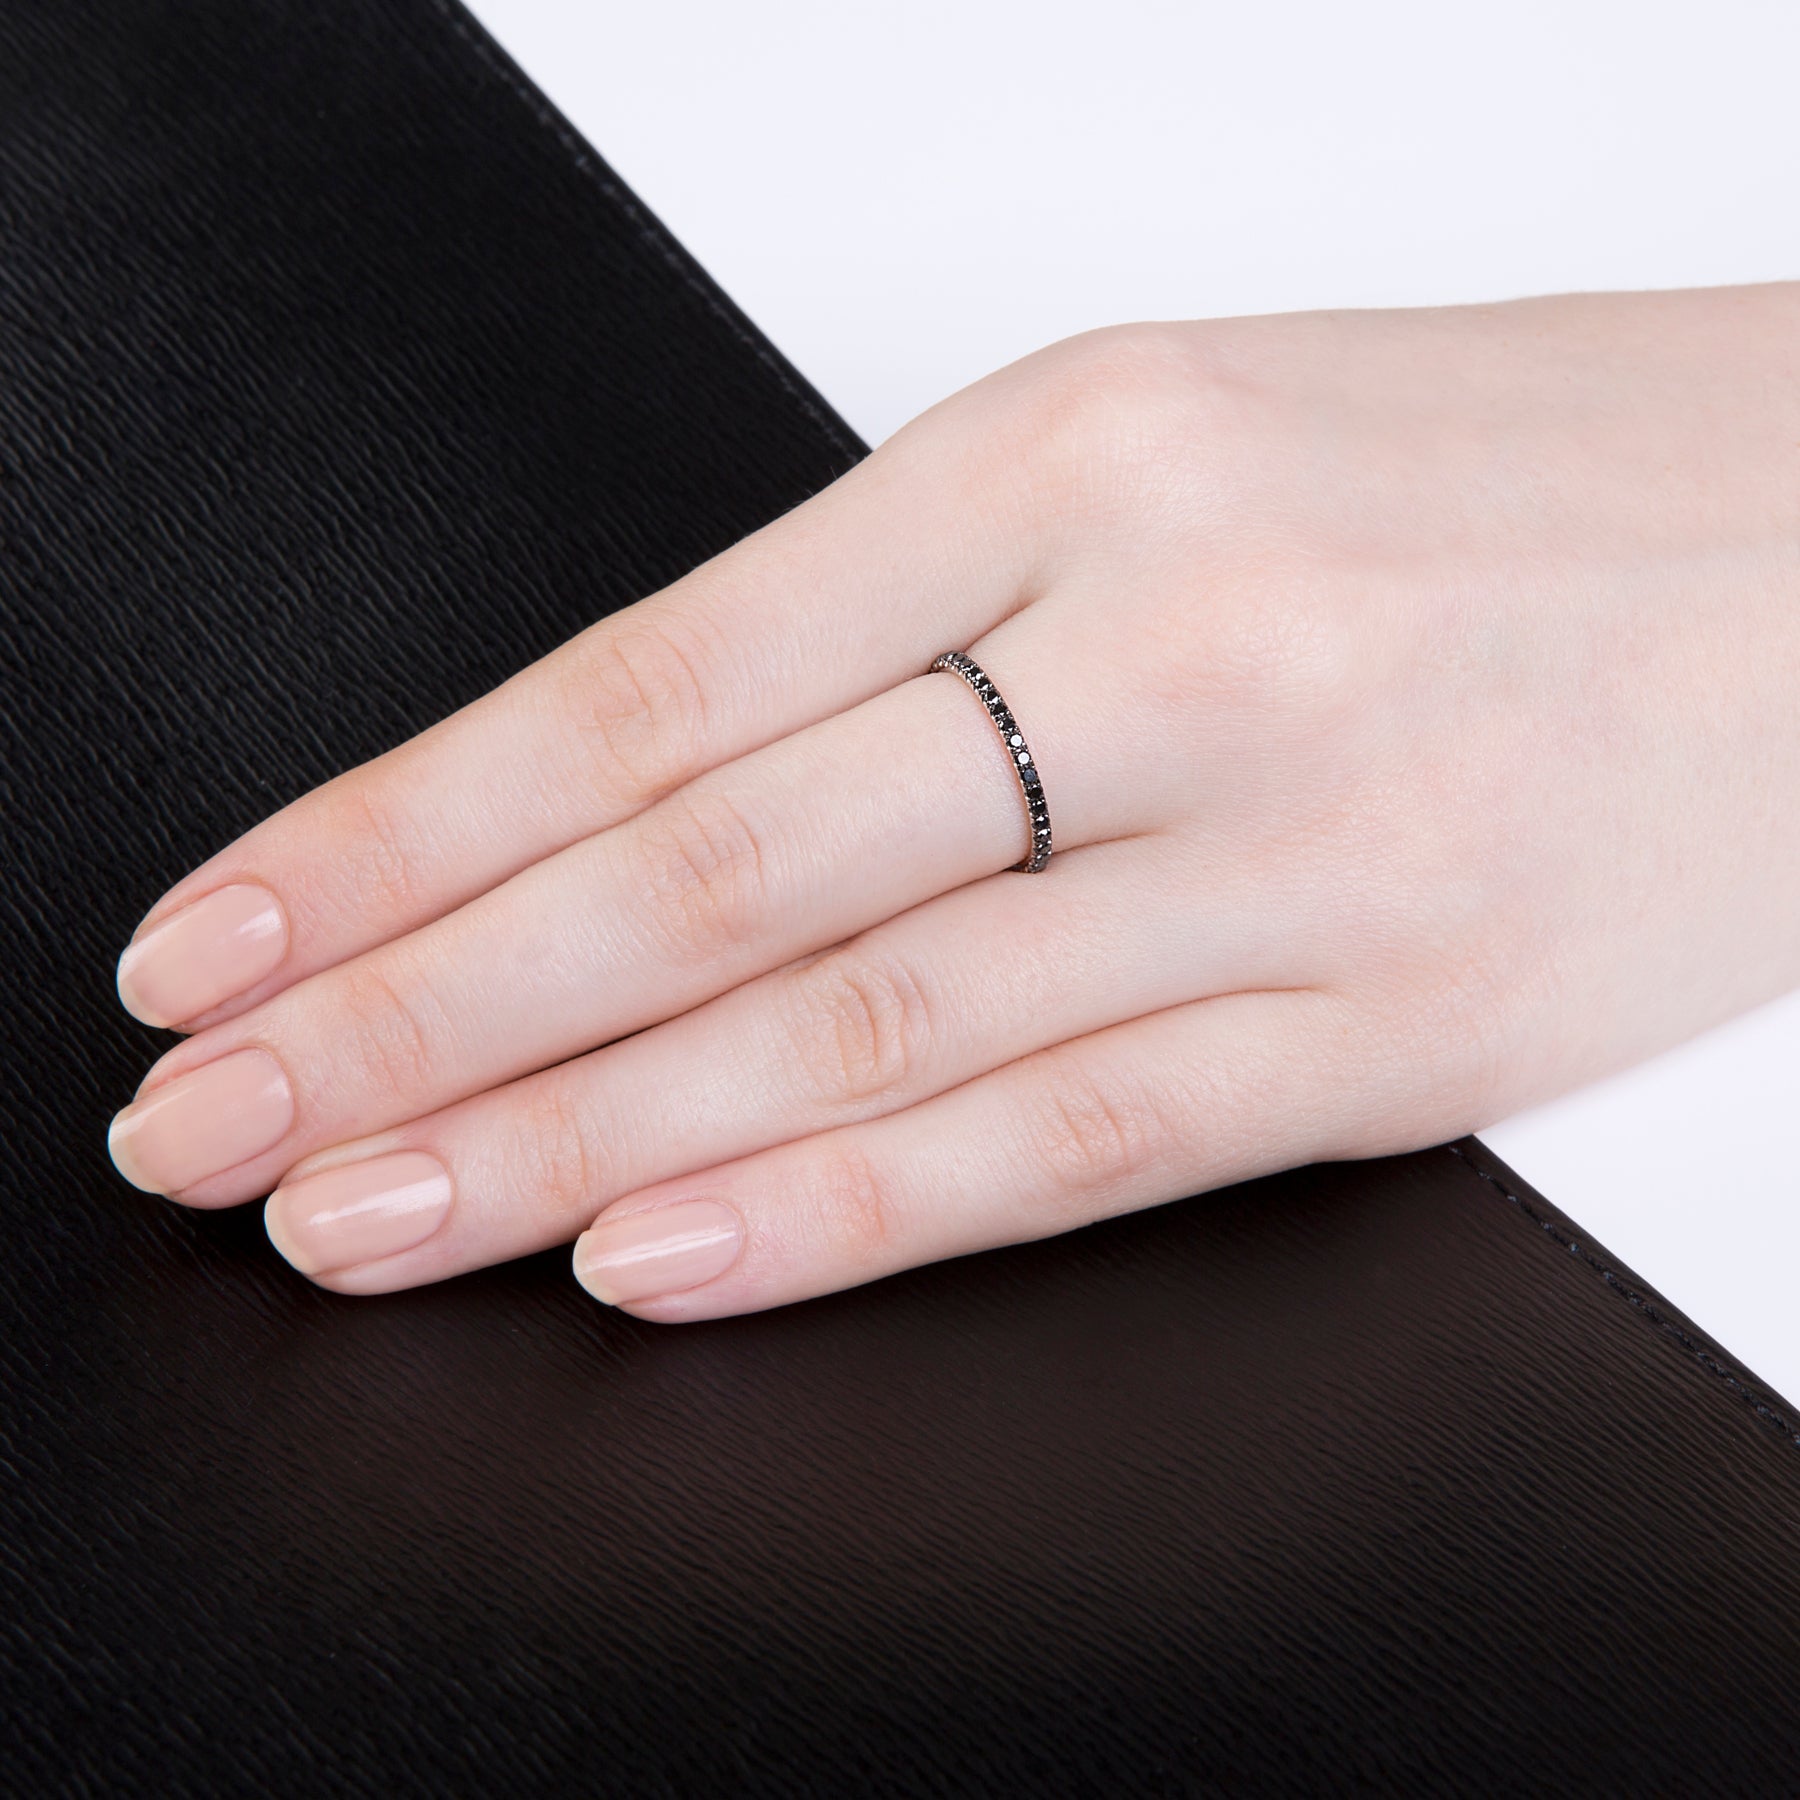 Image of Verifine black diamond ring with 18 carat white gold on a lady's hand